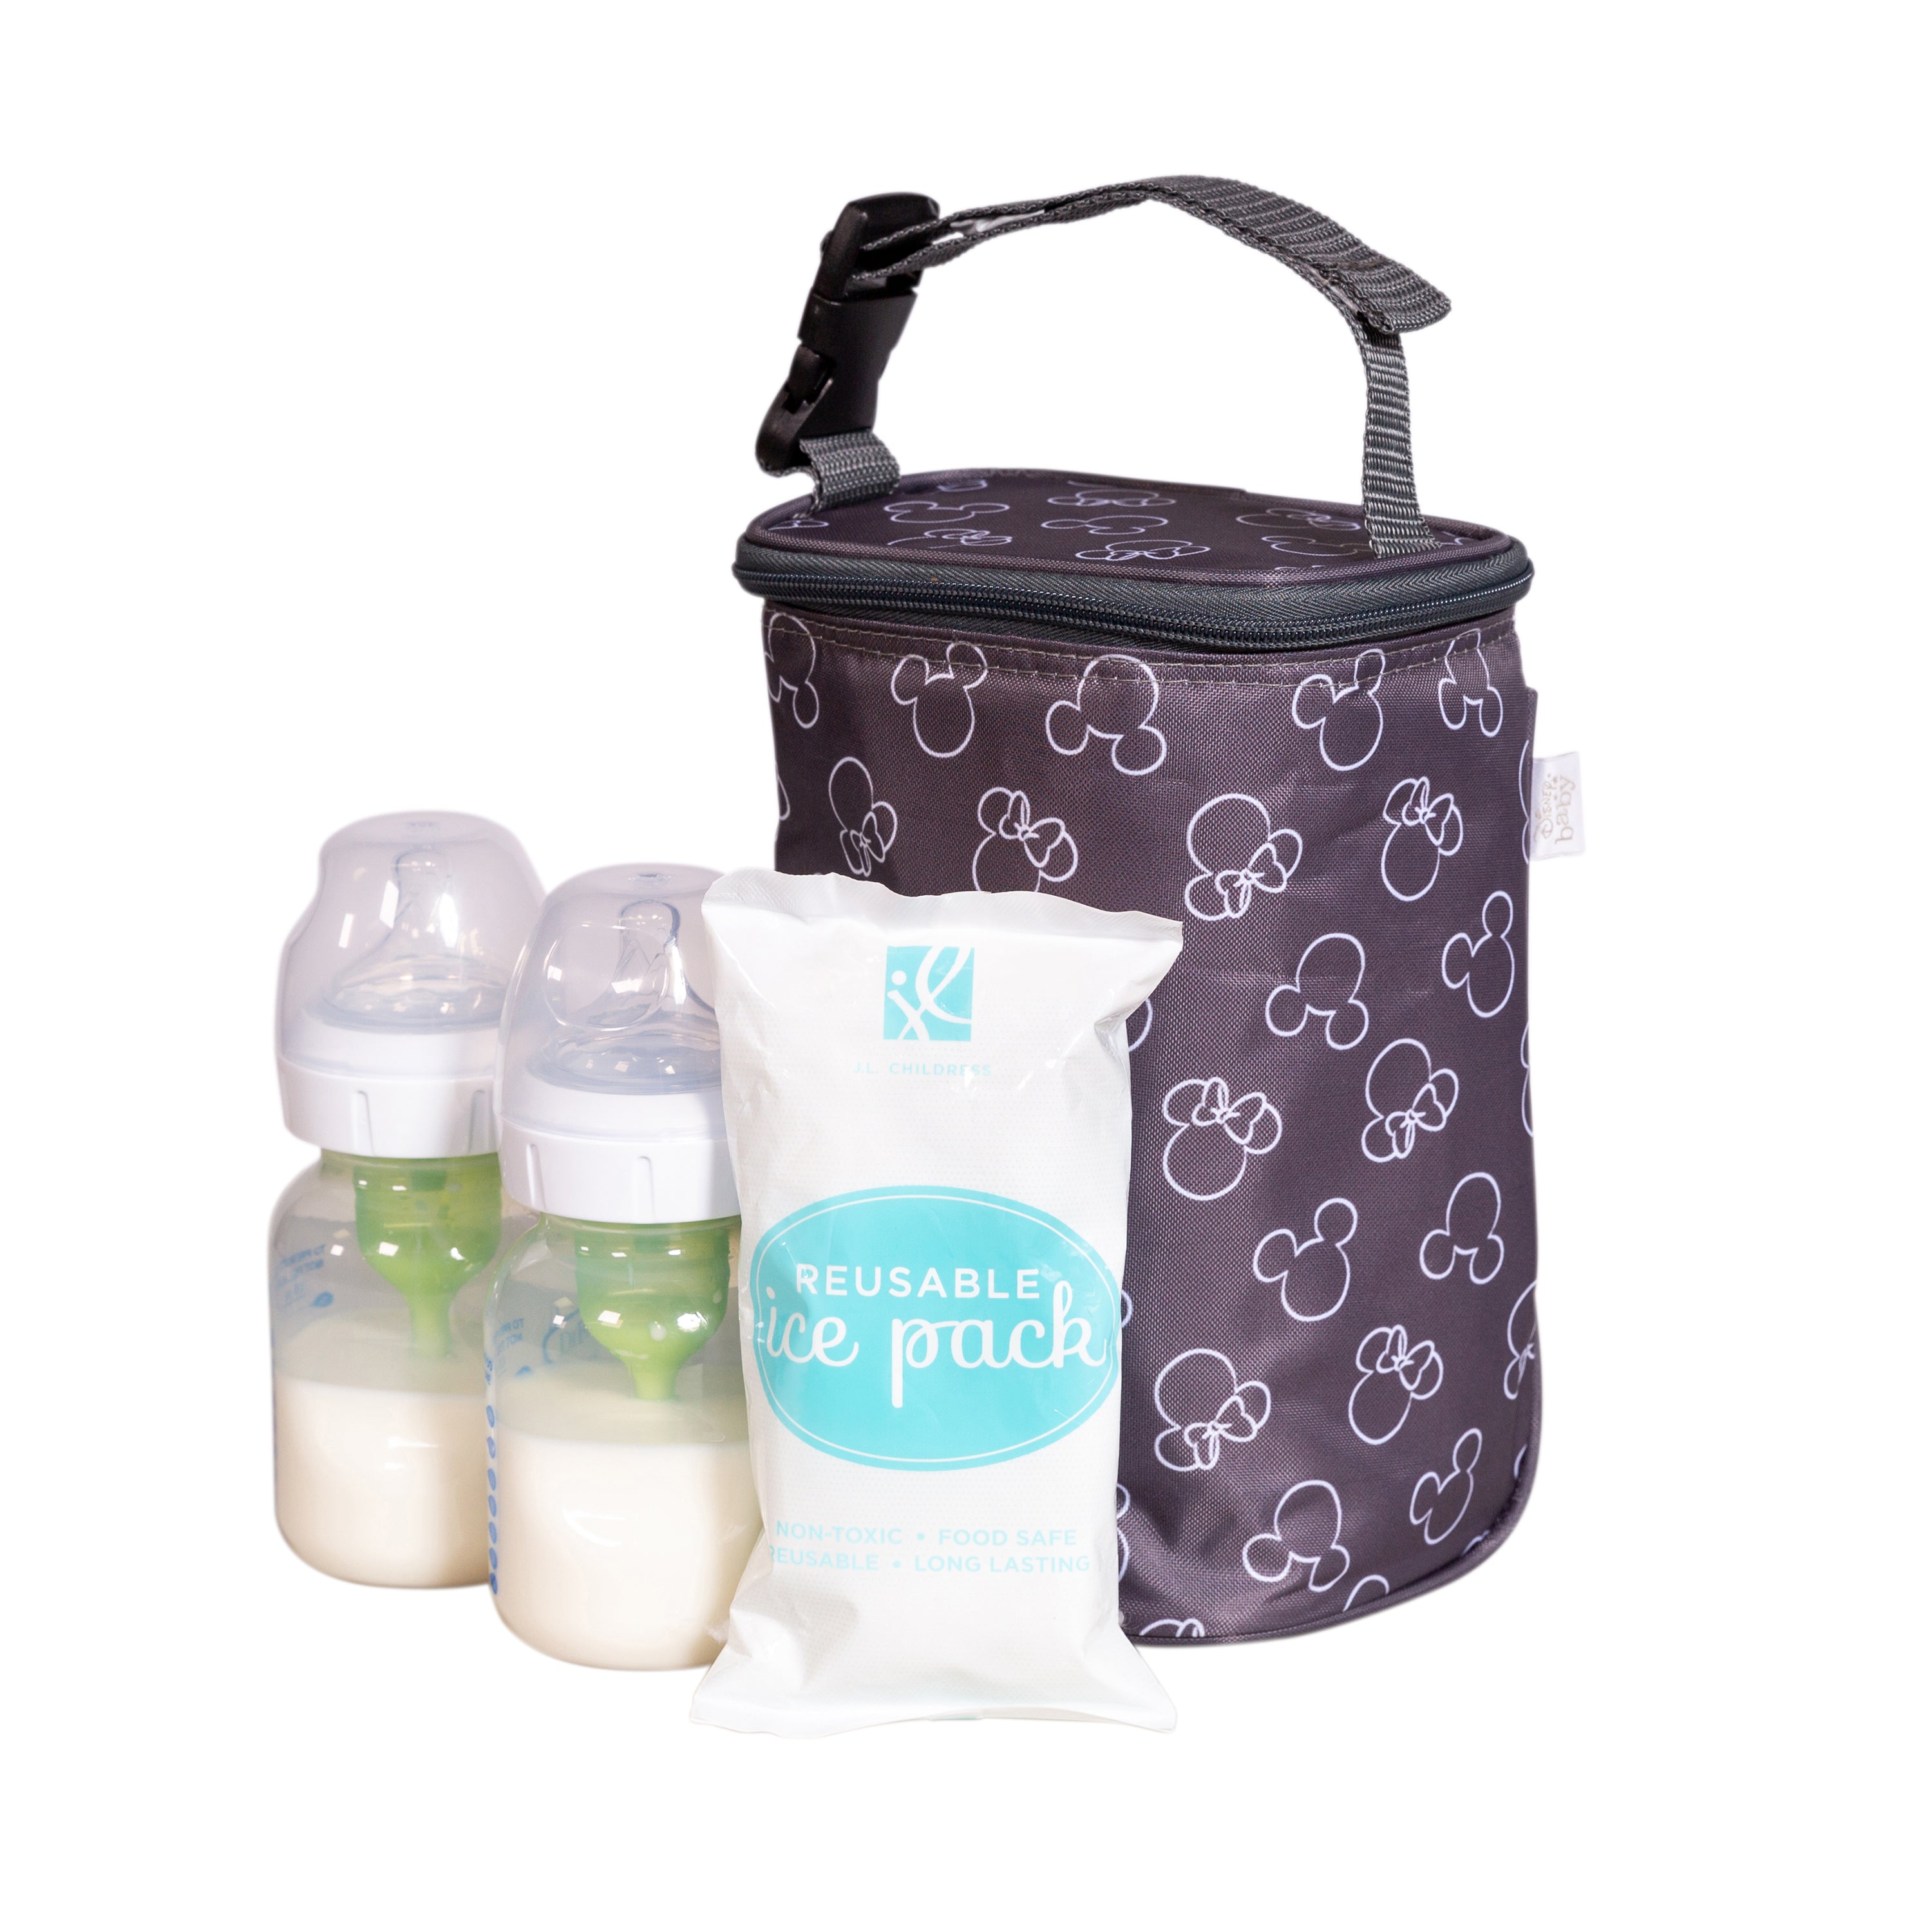 J L Childress Disney Baby TwoCOOL Double Bottle Cooler, Mickey Minnie - Ivory